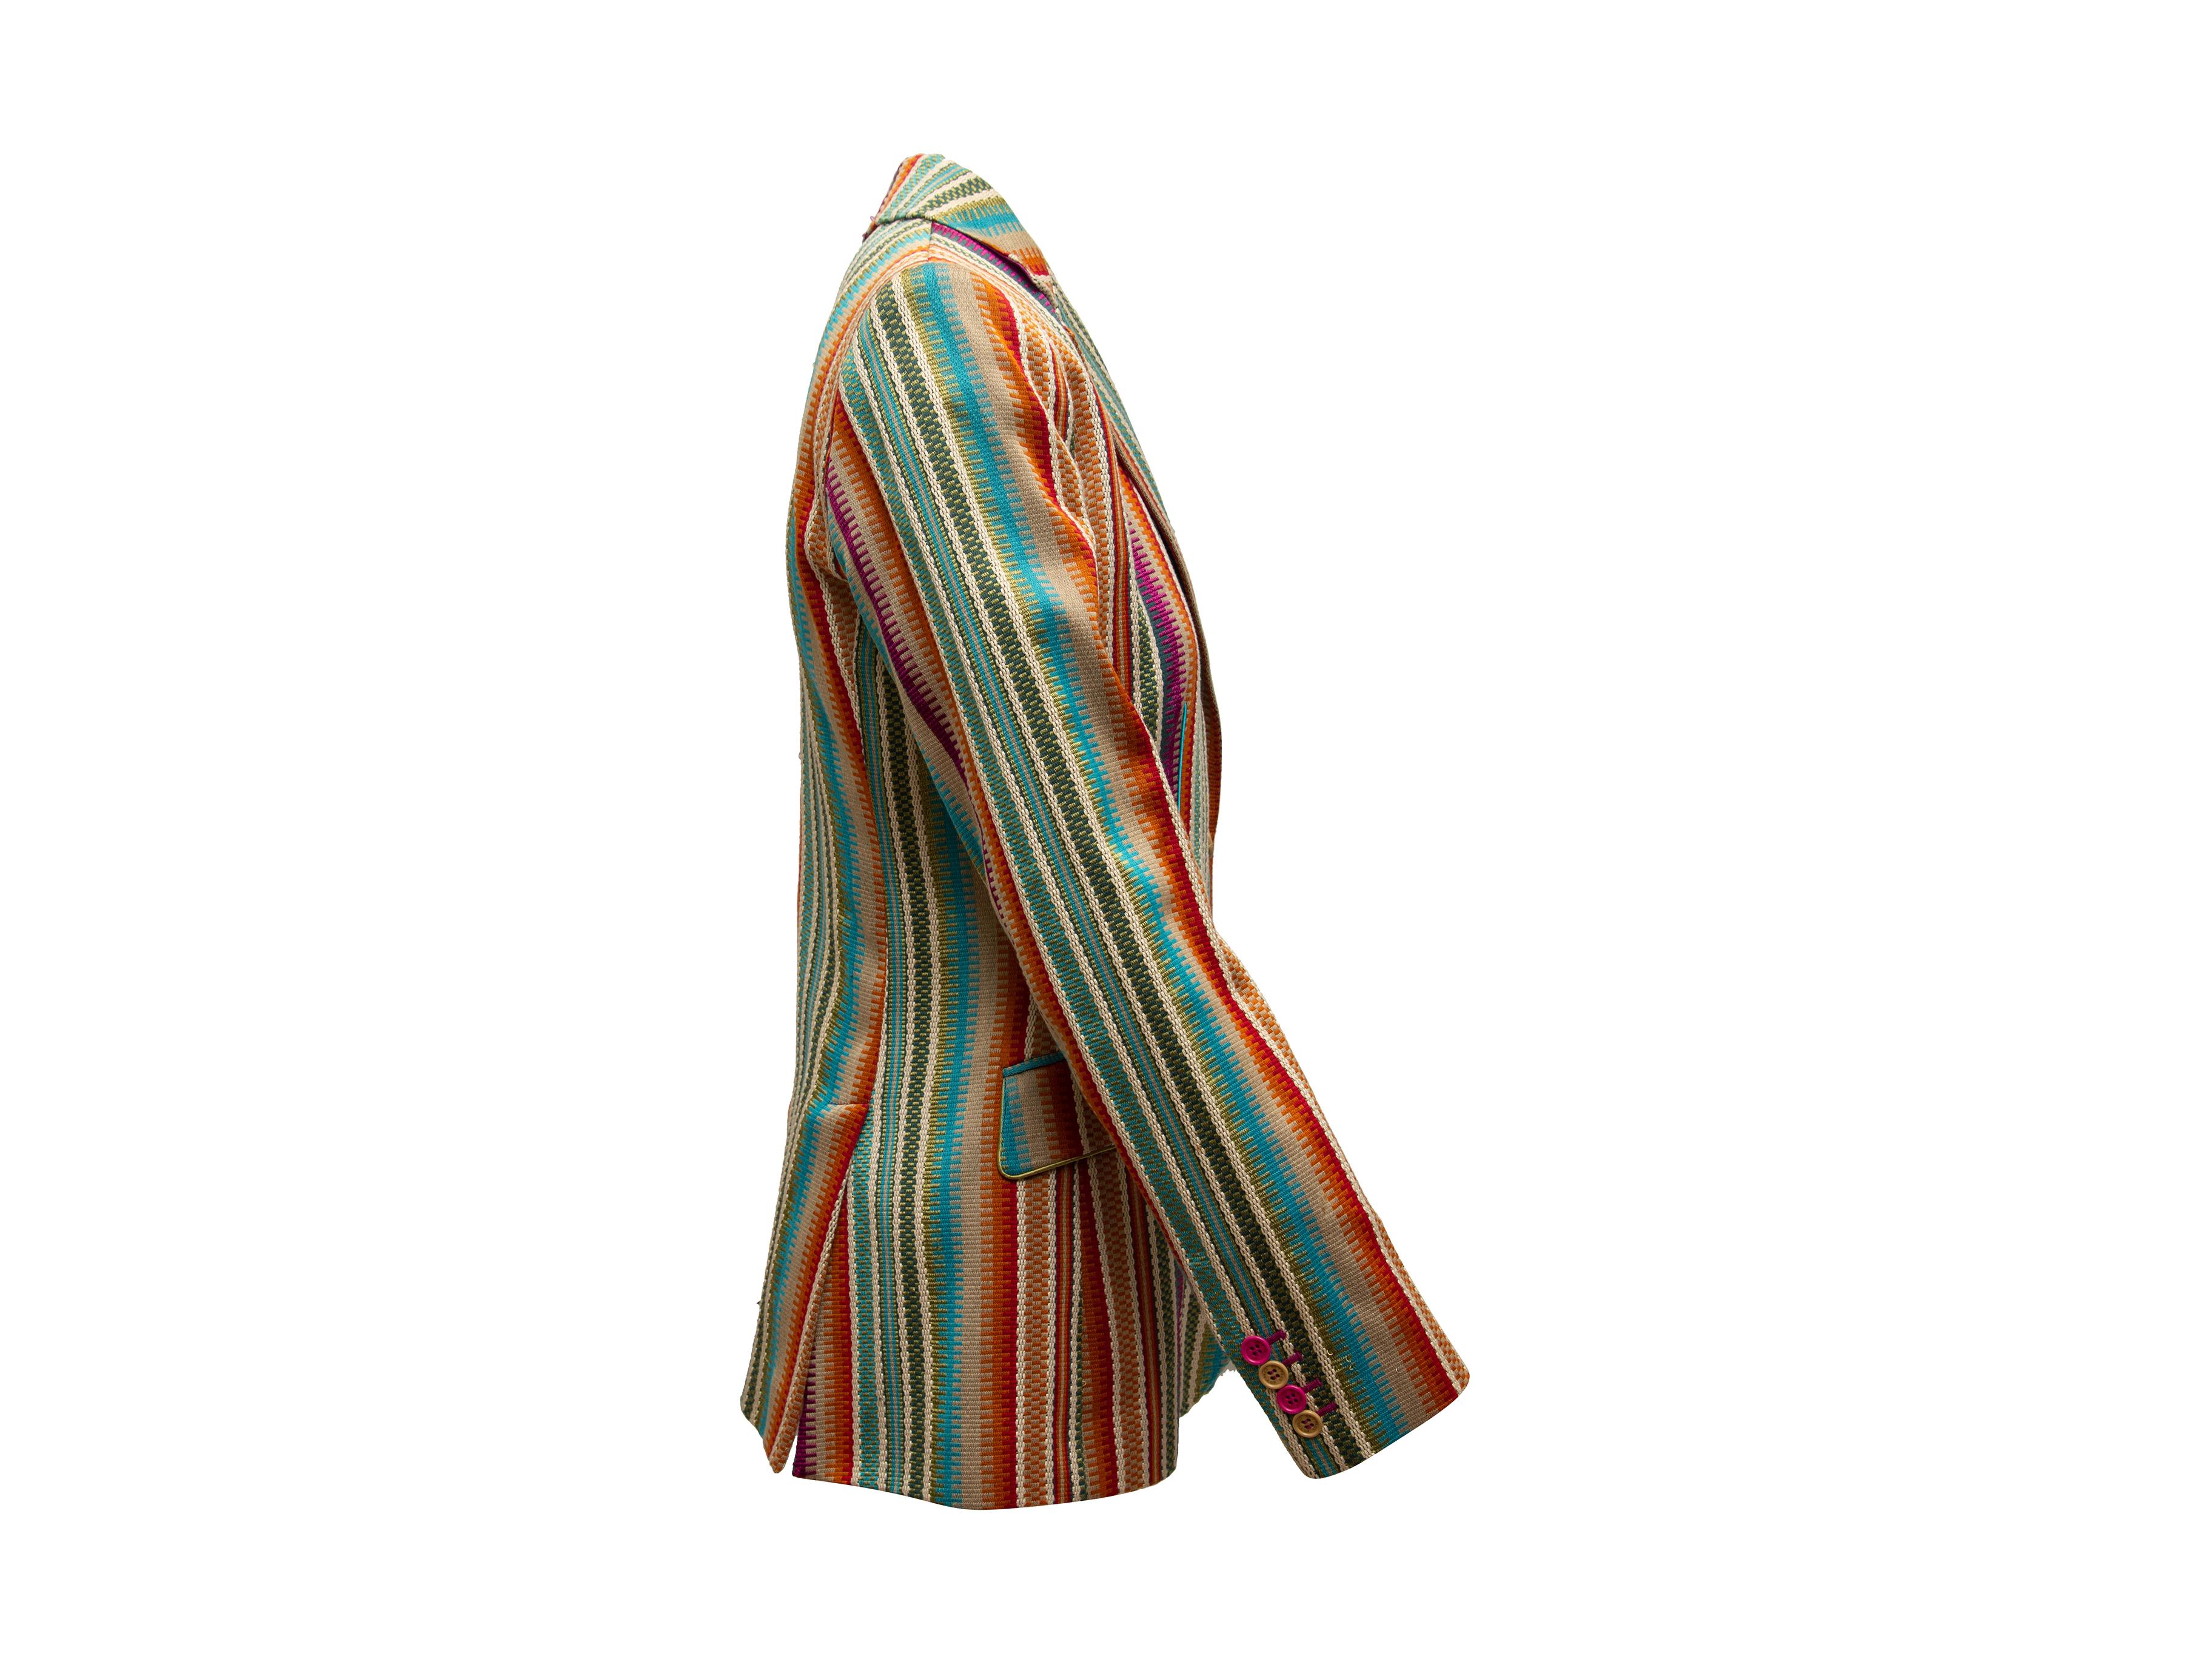 Product details: Green and multicolor striped blazer by Etro. Notched lapel. Single welt pocket at bust. Dual flap pockets at hips. Button closures at front. Designer size 44. 38